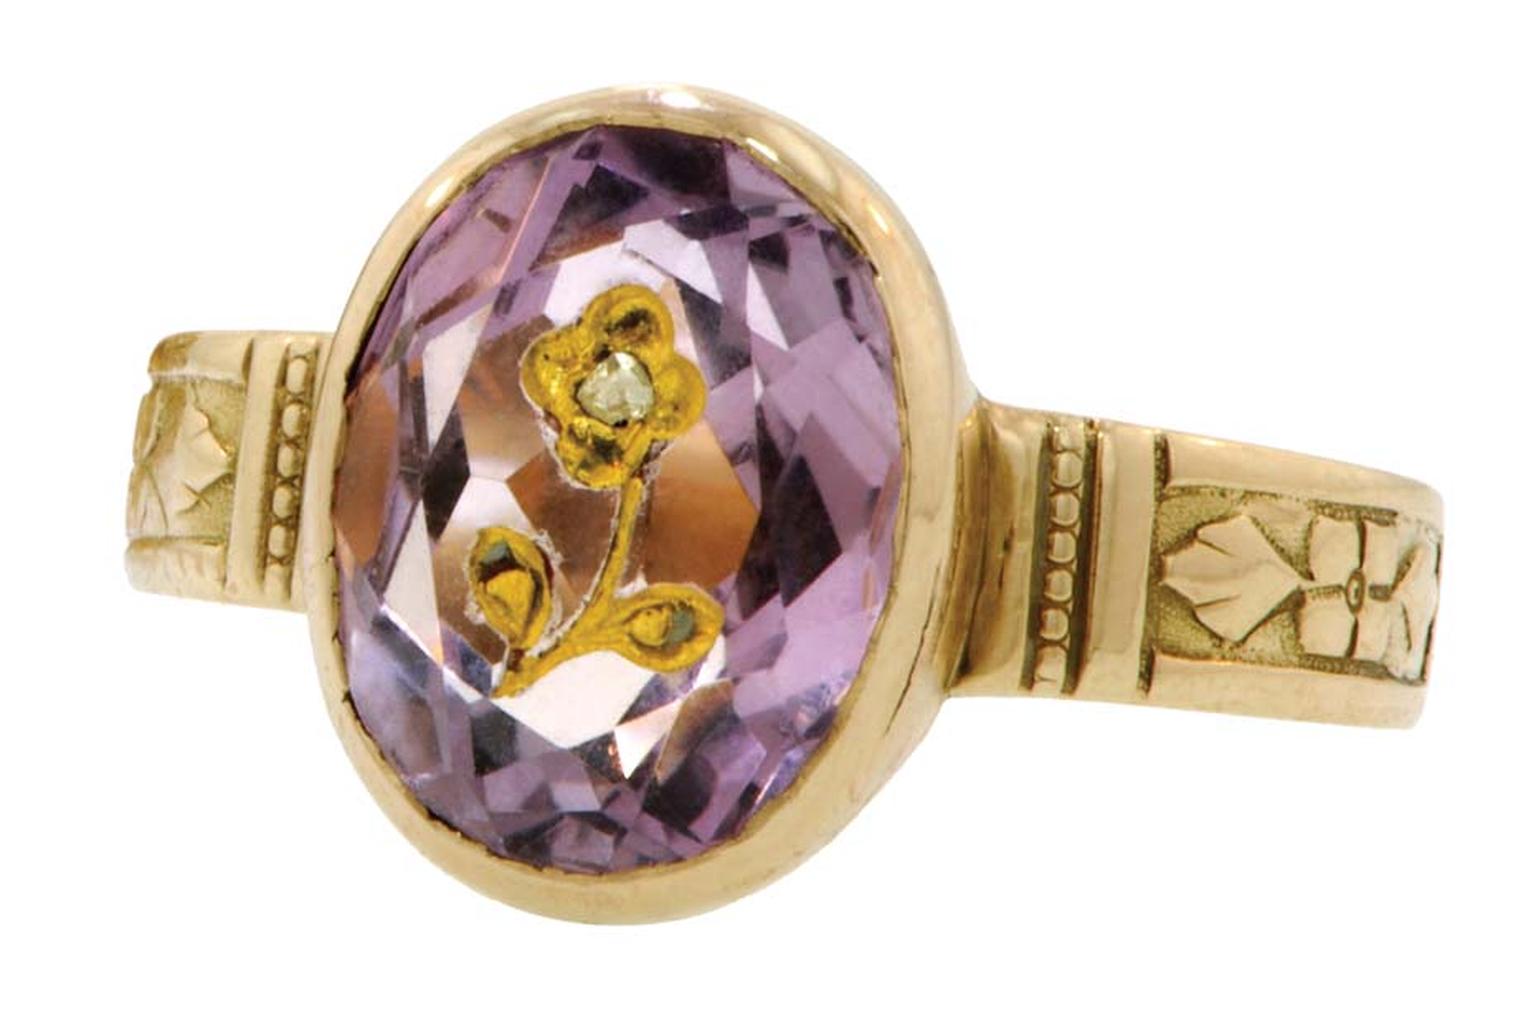 Forget-Me-Not gold ring with amethysts and diamonds, circa 1876.